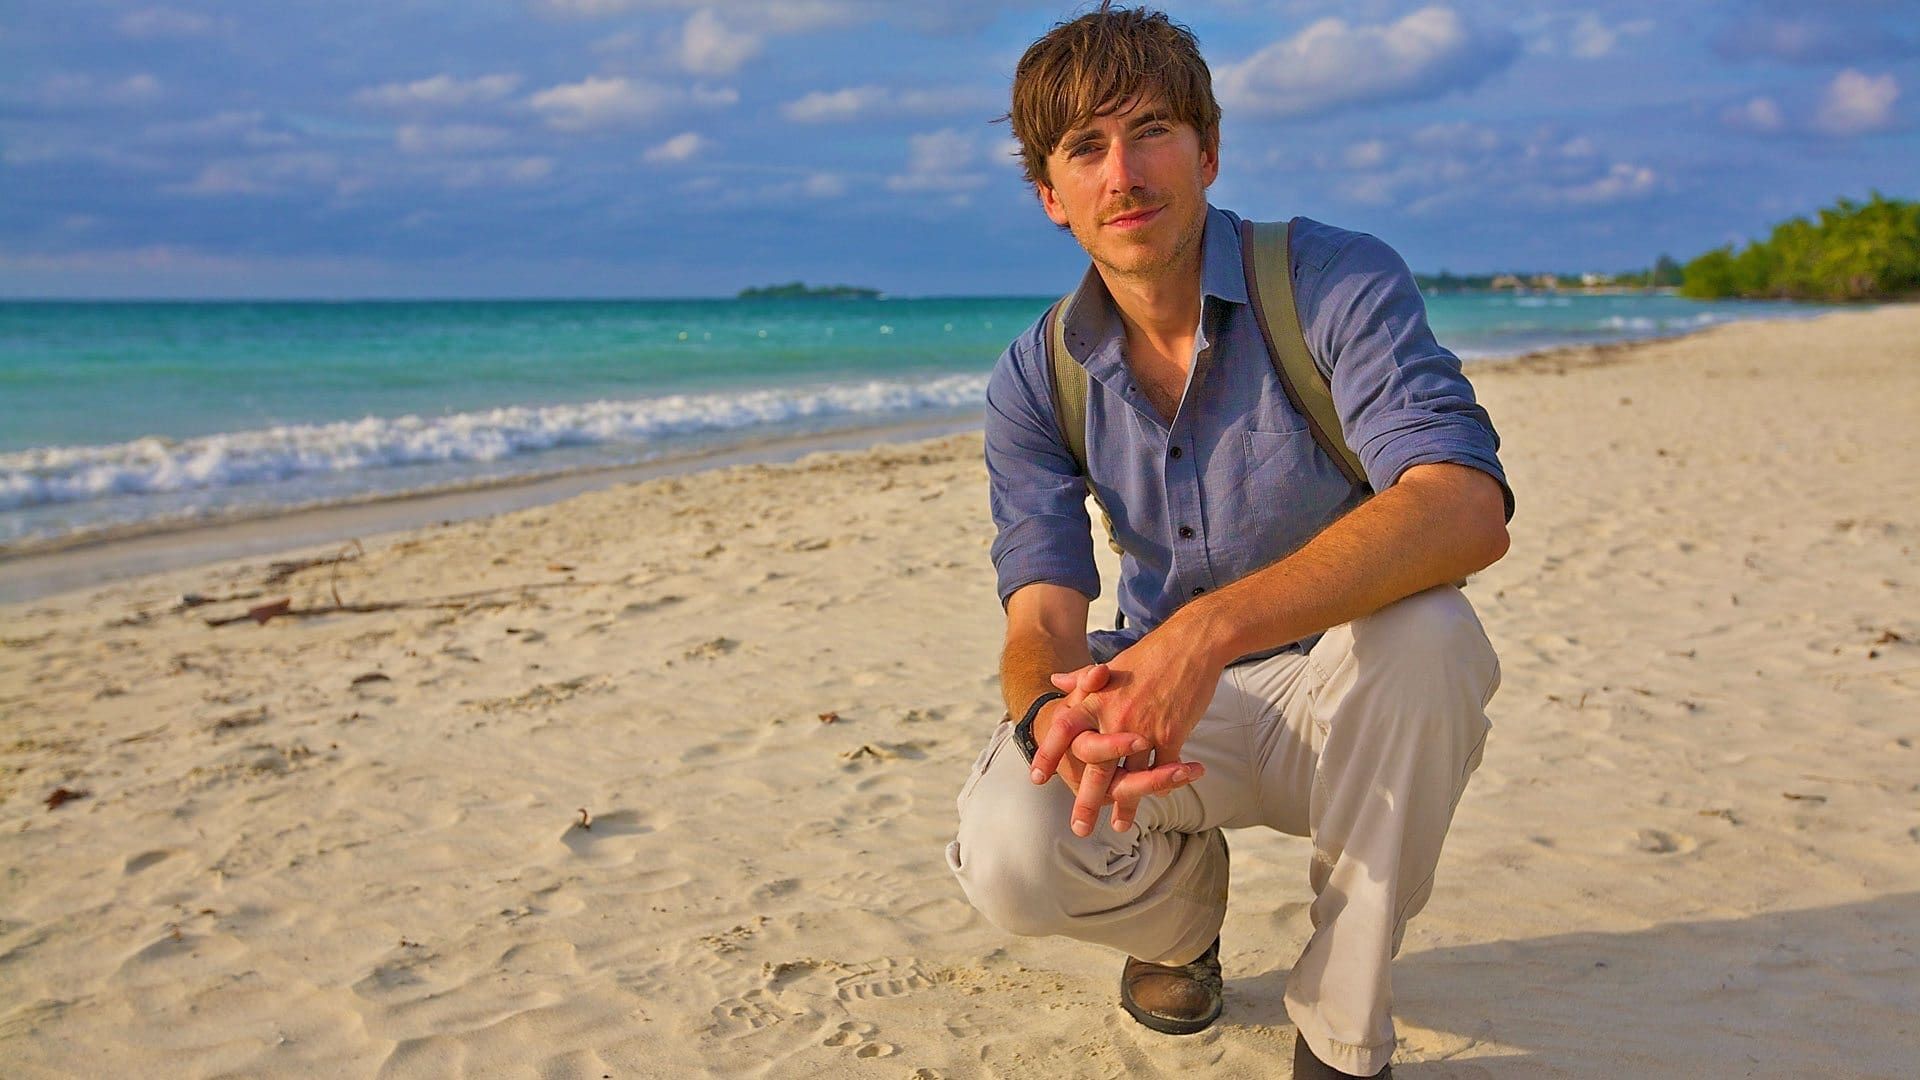 Caribbean with Simon Reeve background